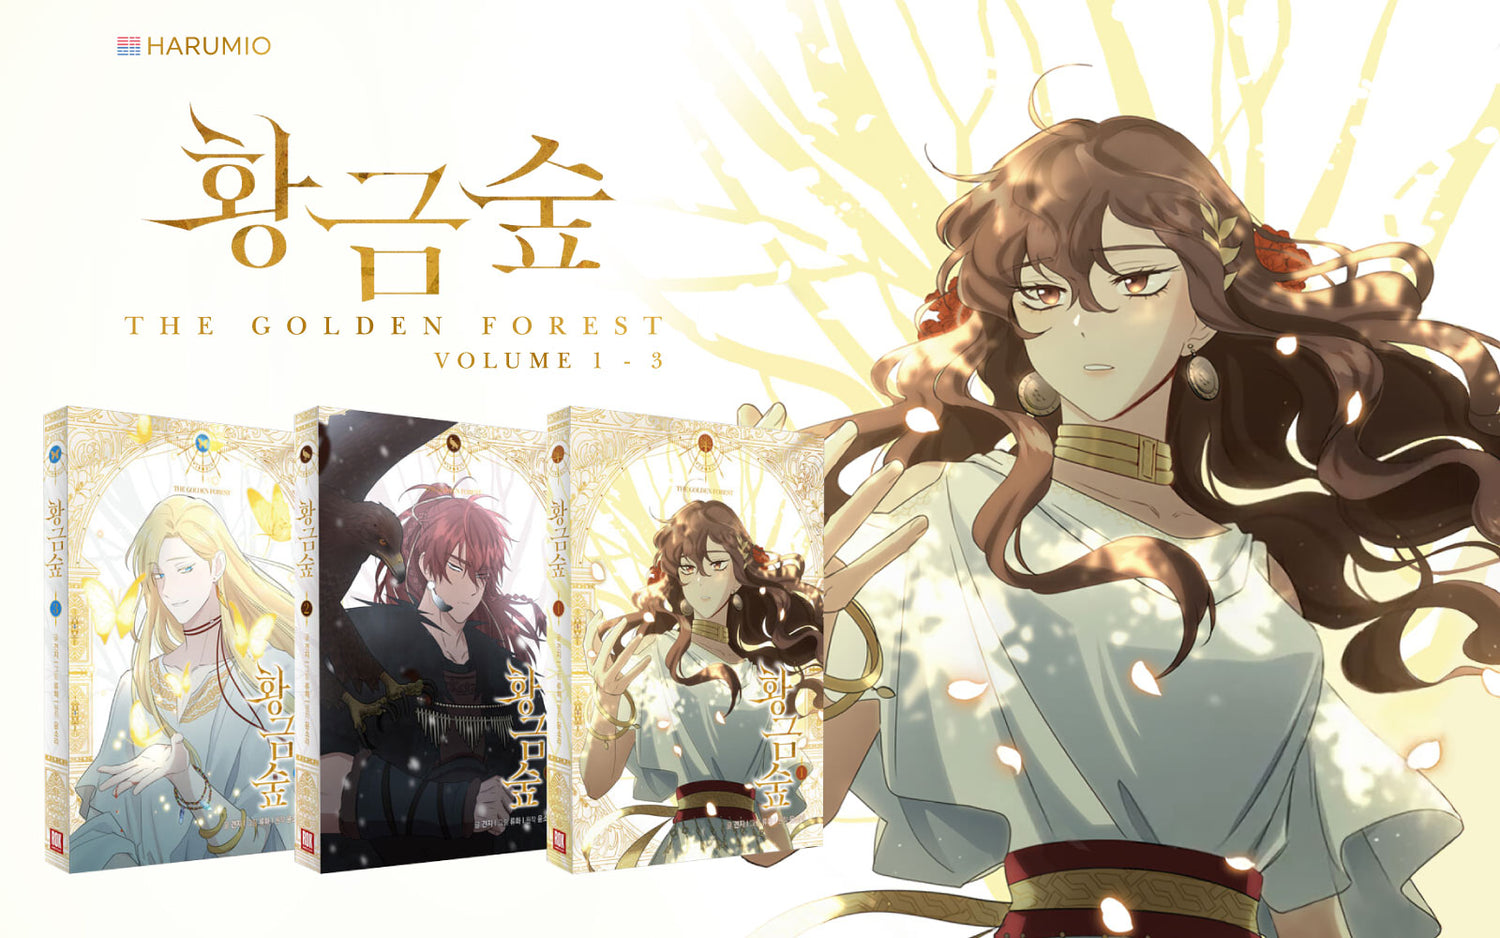 A New Adventure Awaits: The Golden Forest Takes Readers on a Thrilling Journey